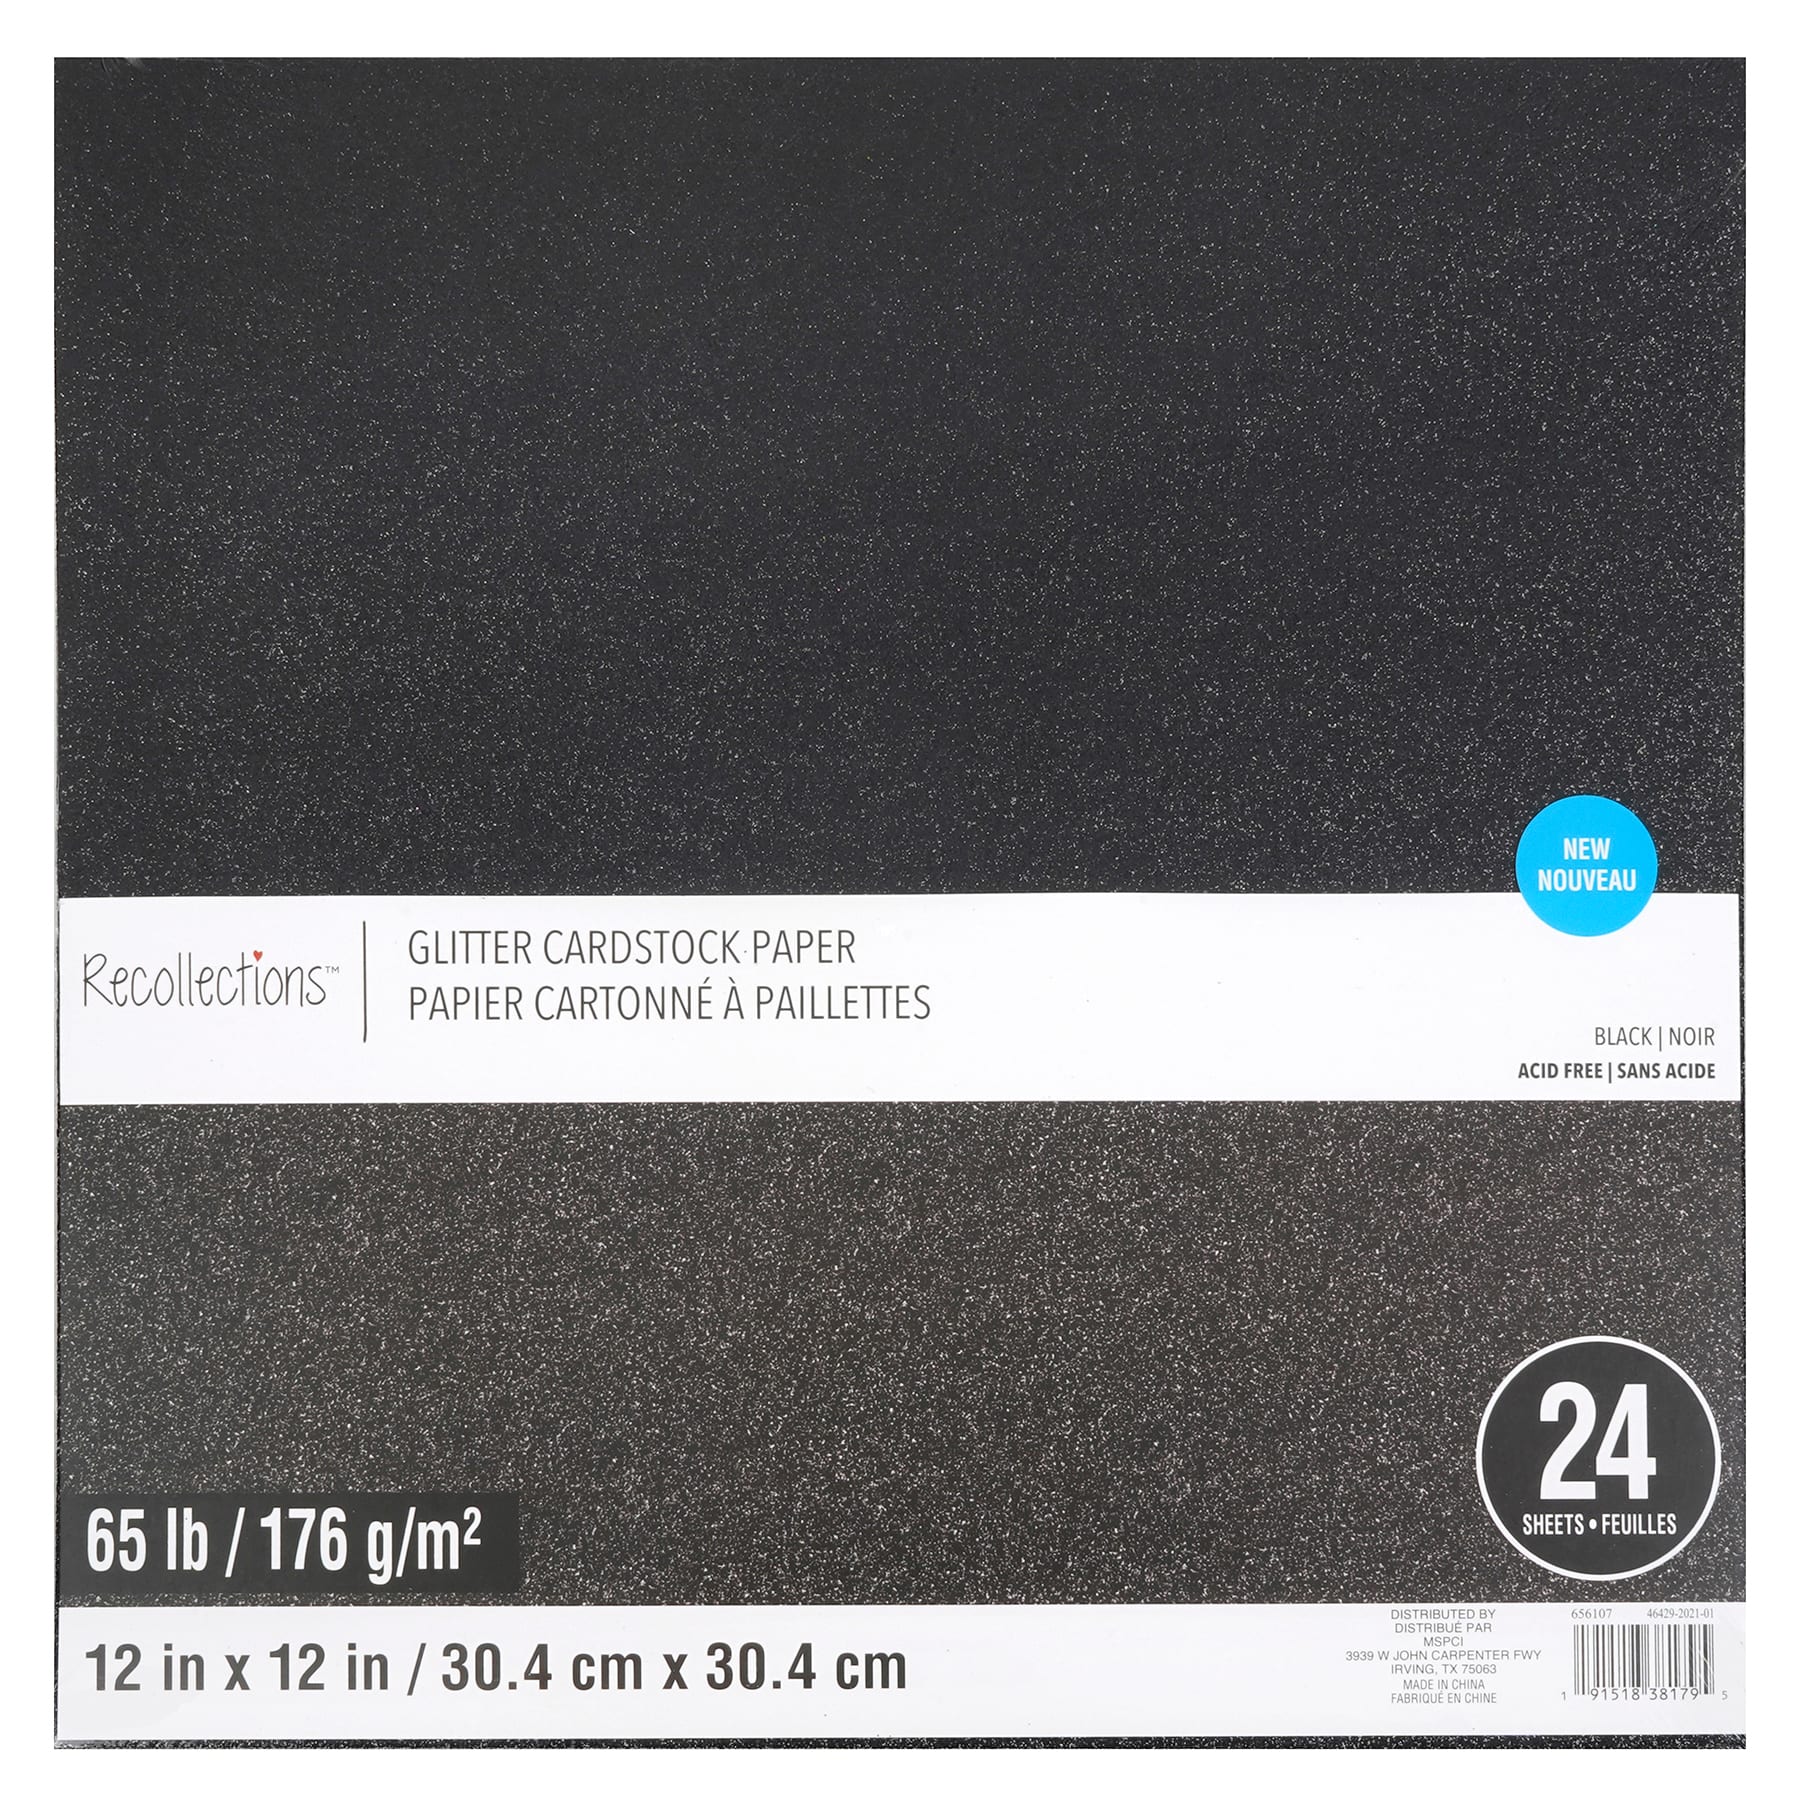 Michaels Bulk 6 Packs: 24 Ct. (144 Total) Glitter 12 inch x 12 inch Cardstock Paper by Recollections, Size: 12 x 12, Silver